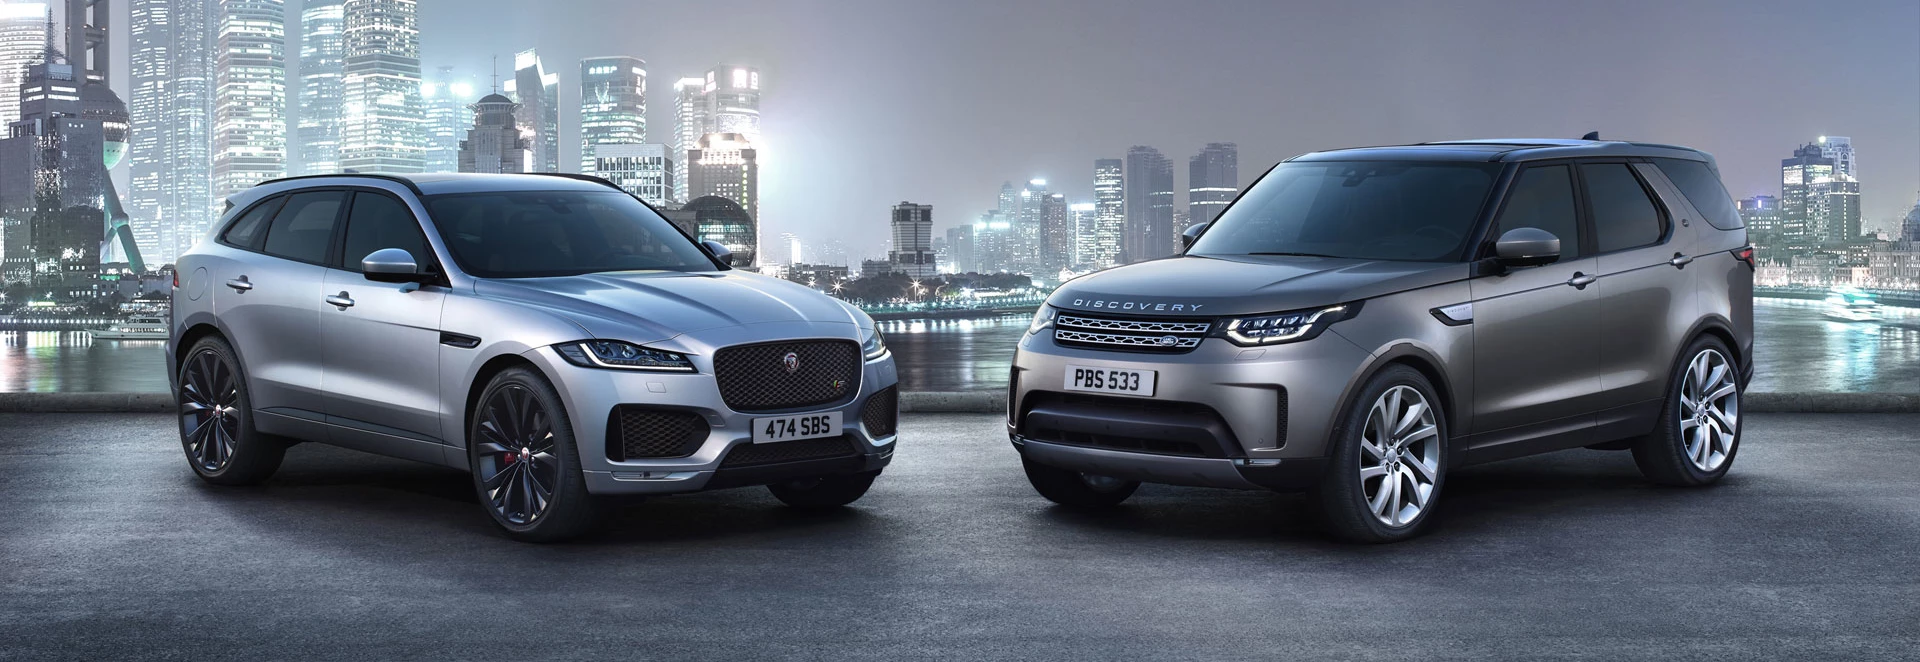 Jaguar Land Rover Chief Executive calls for greater Brexit certainty 